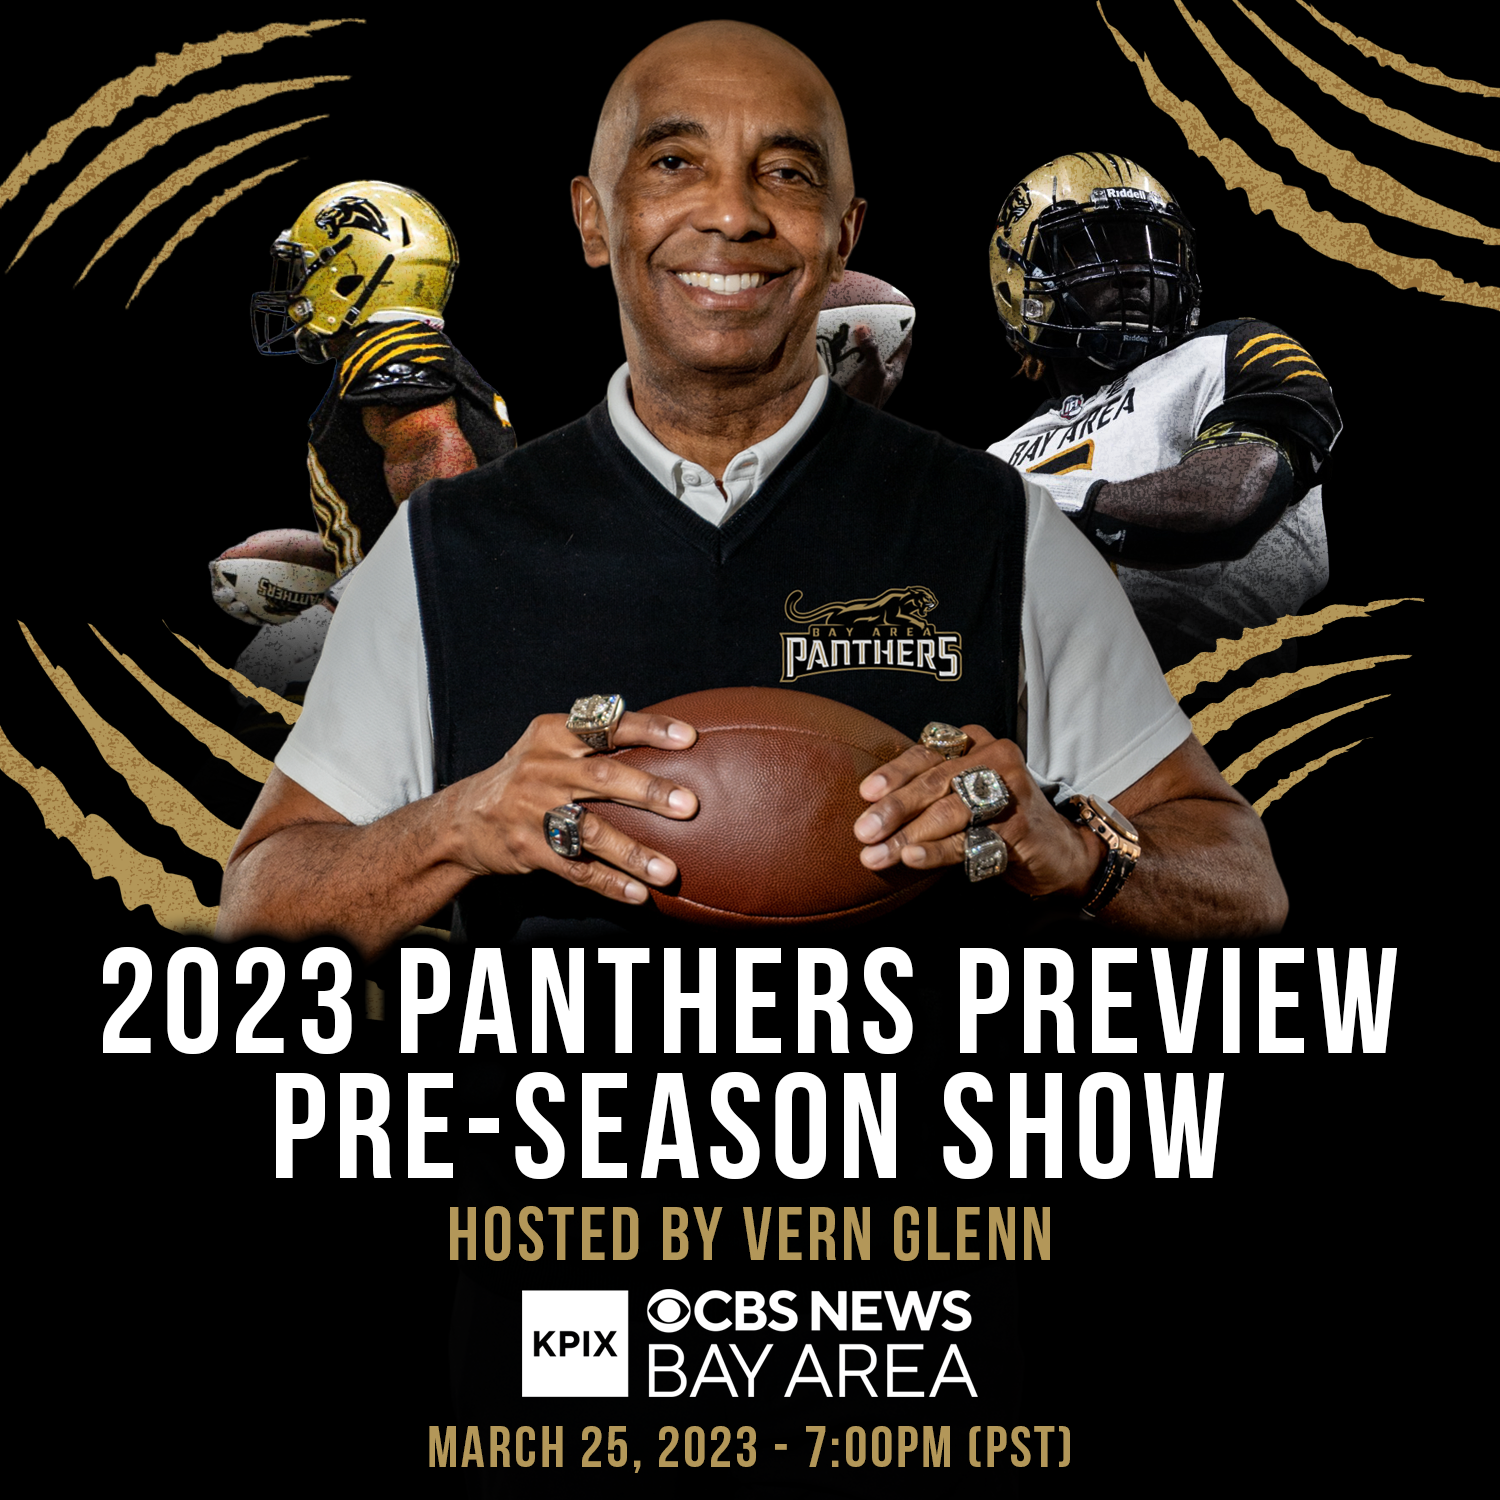 Breaking news: Bay Area Panthers and KPIX CBS Bay Area announce new  broadcast agreement - Morgan Hill Life